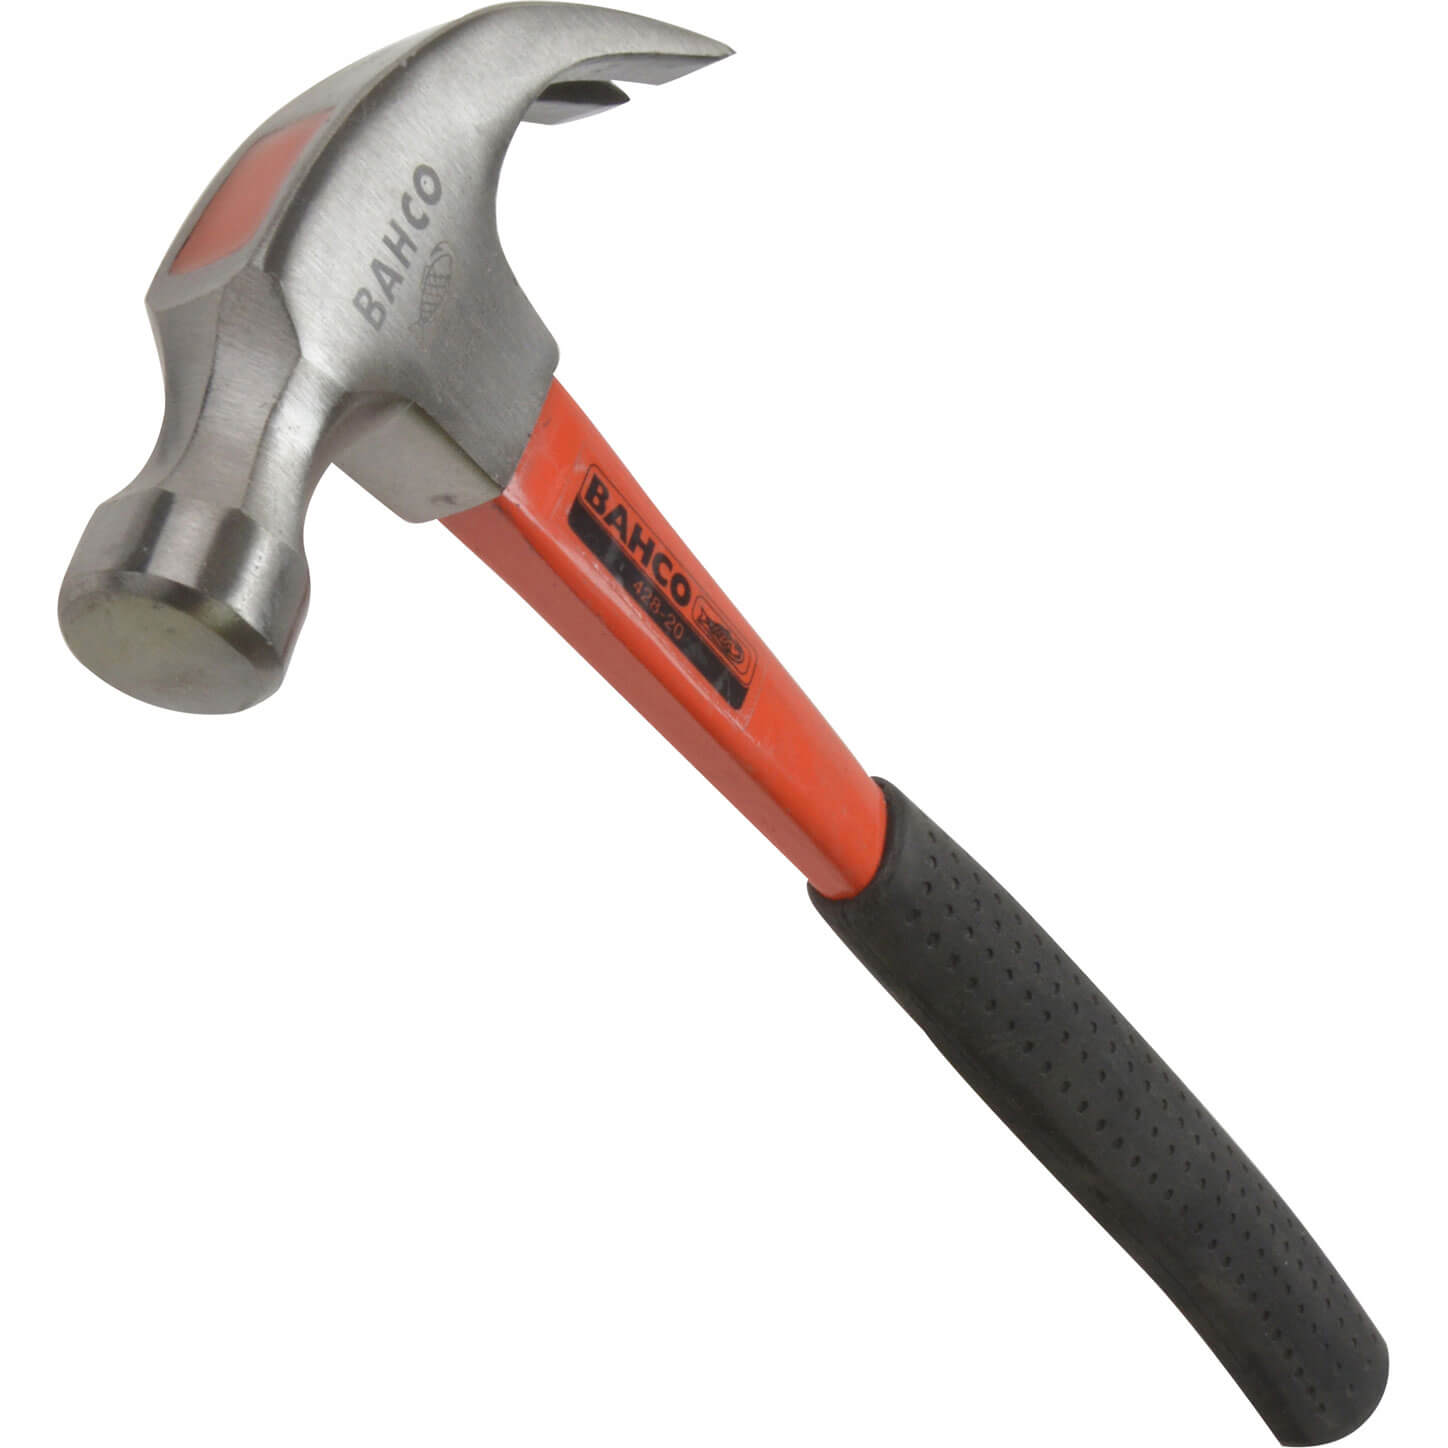 Image of Bahco Claw Hammer Glass Fibre Handle 20oz